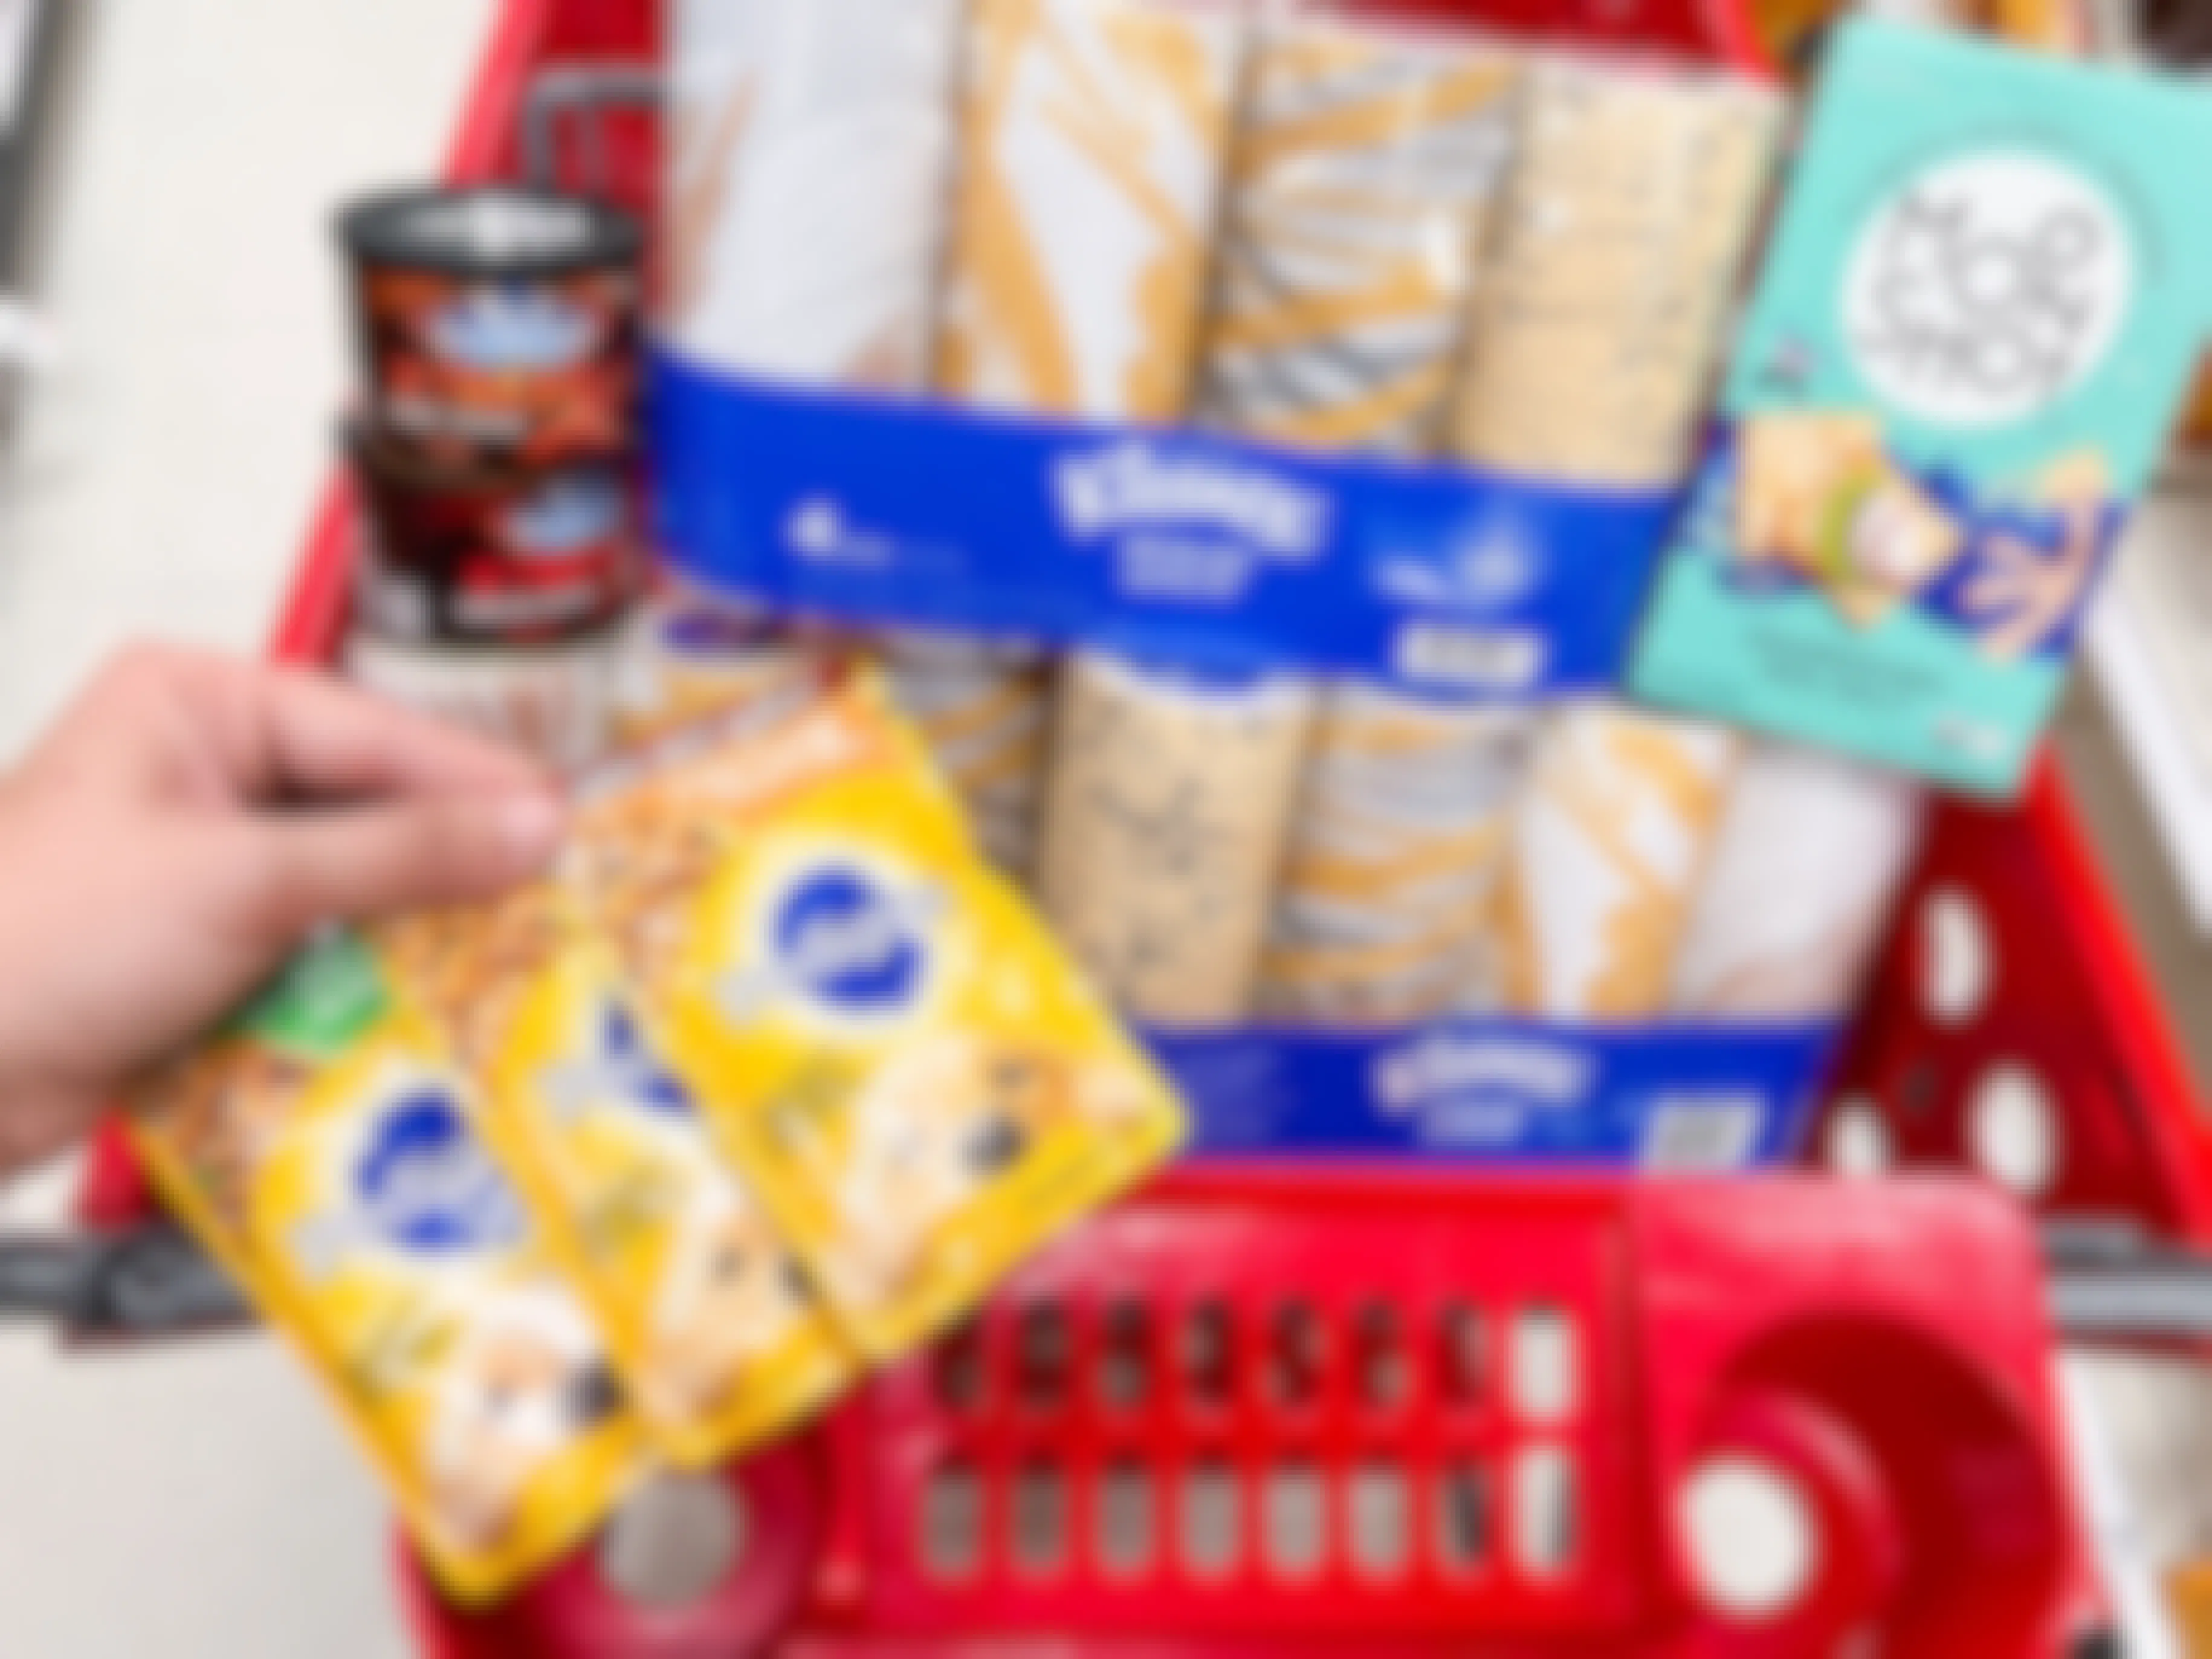 A target shopping cart containing kleenex 4 packs, a box of moonshot crackers, pedigree dog food packs, and blue diamond almond extremes